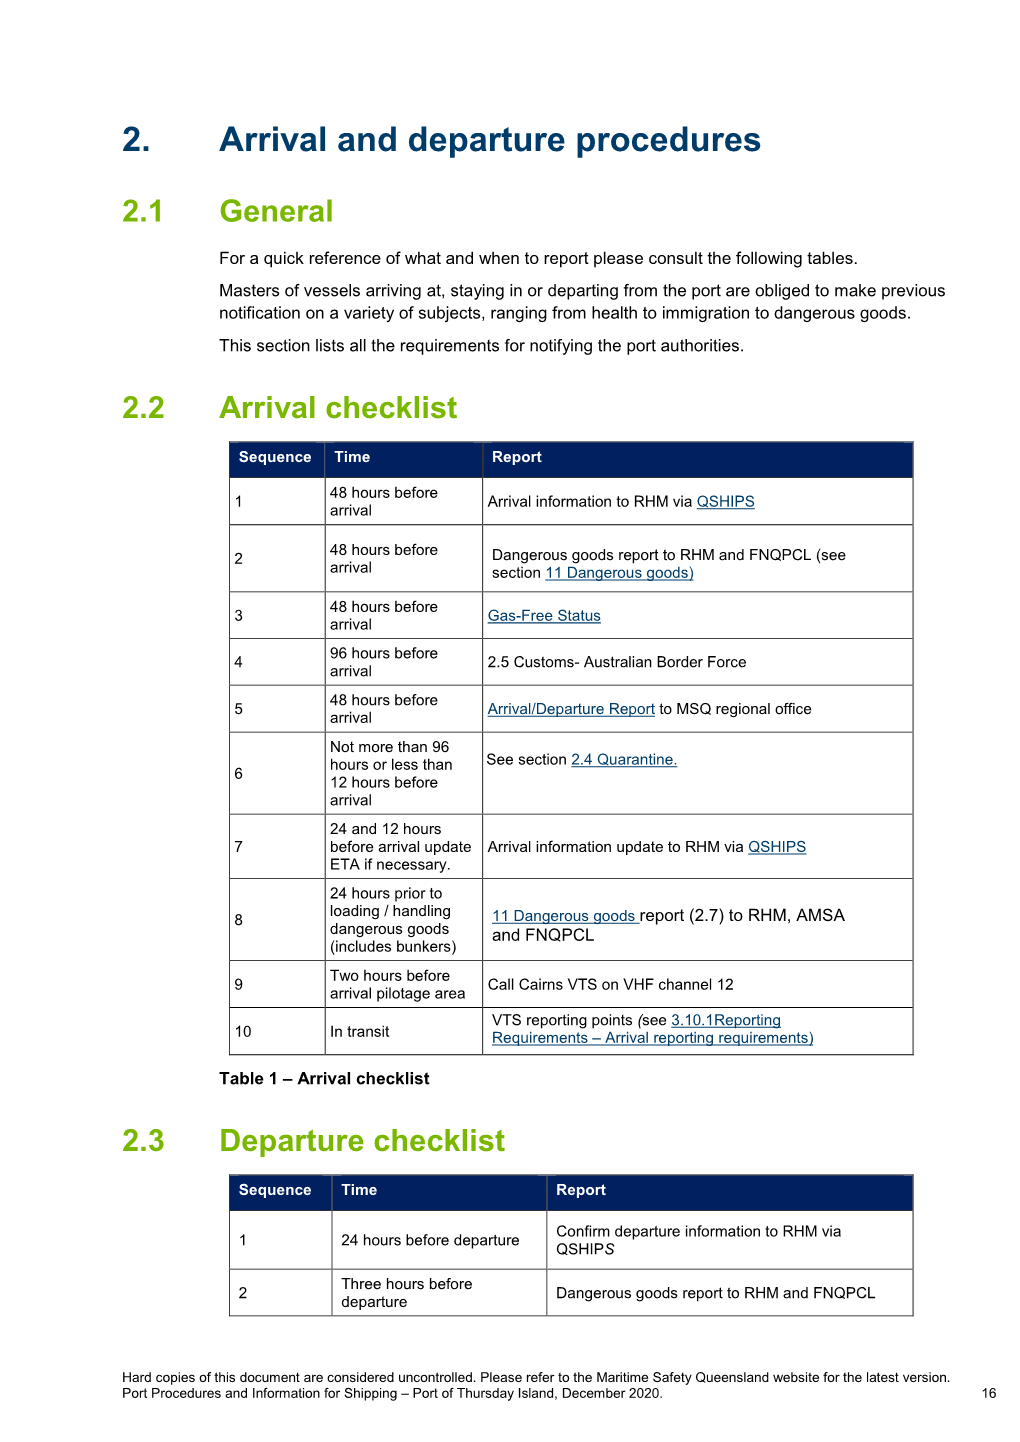 Port Procedures and Information for Shipping – Port of Thursday Island, December 2020